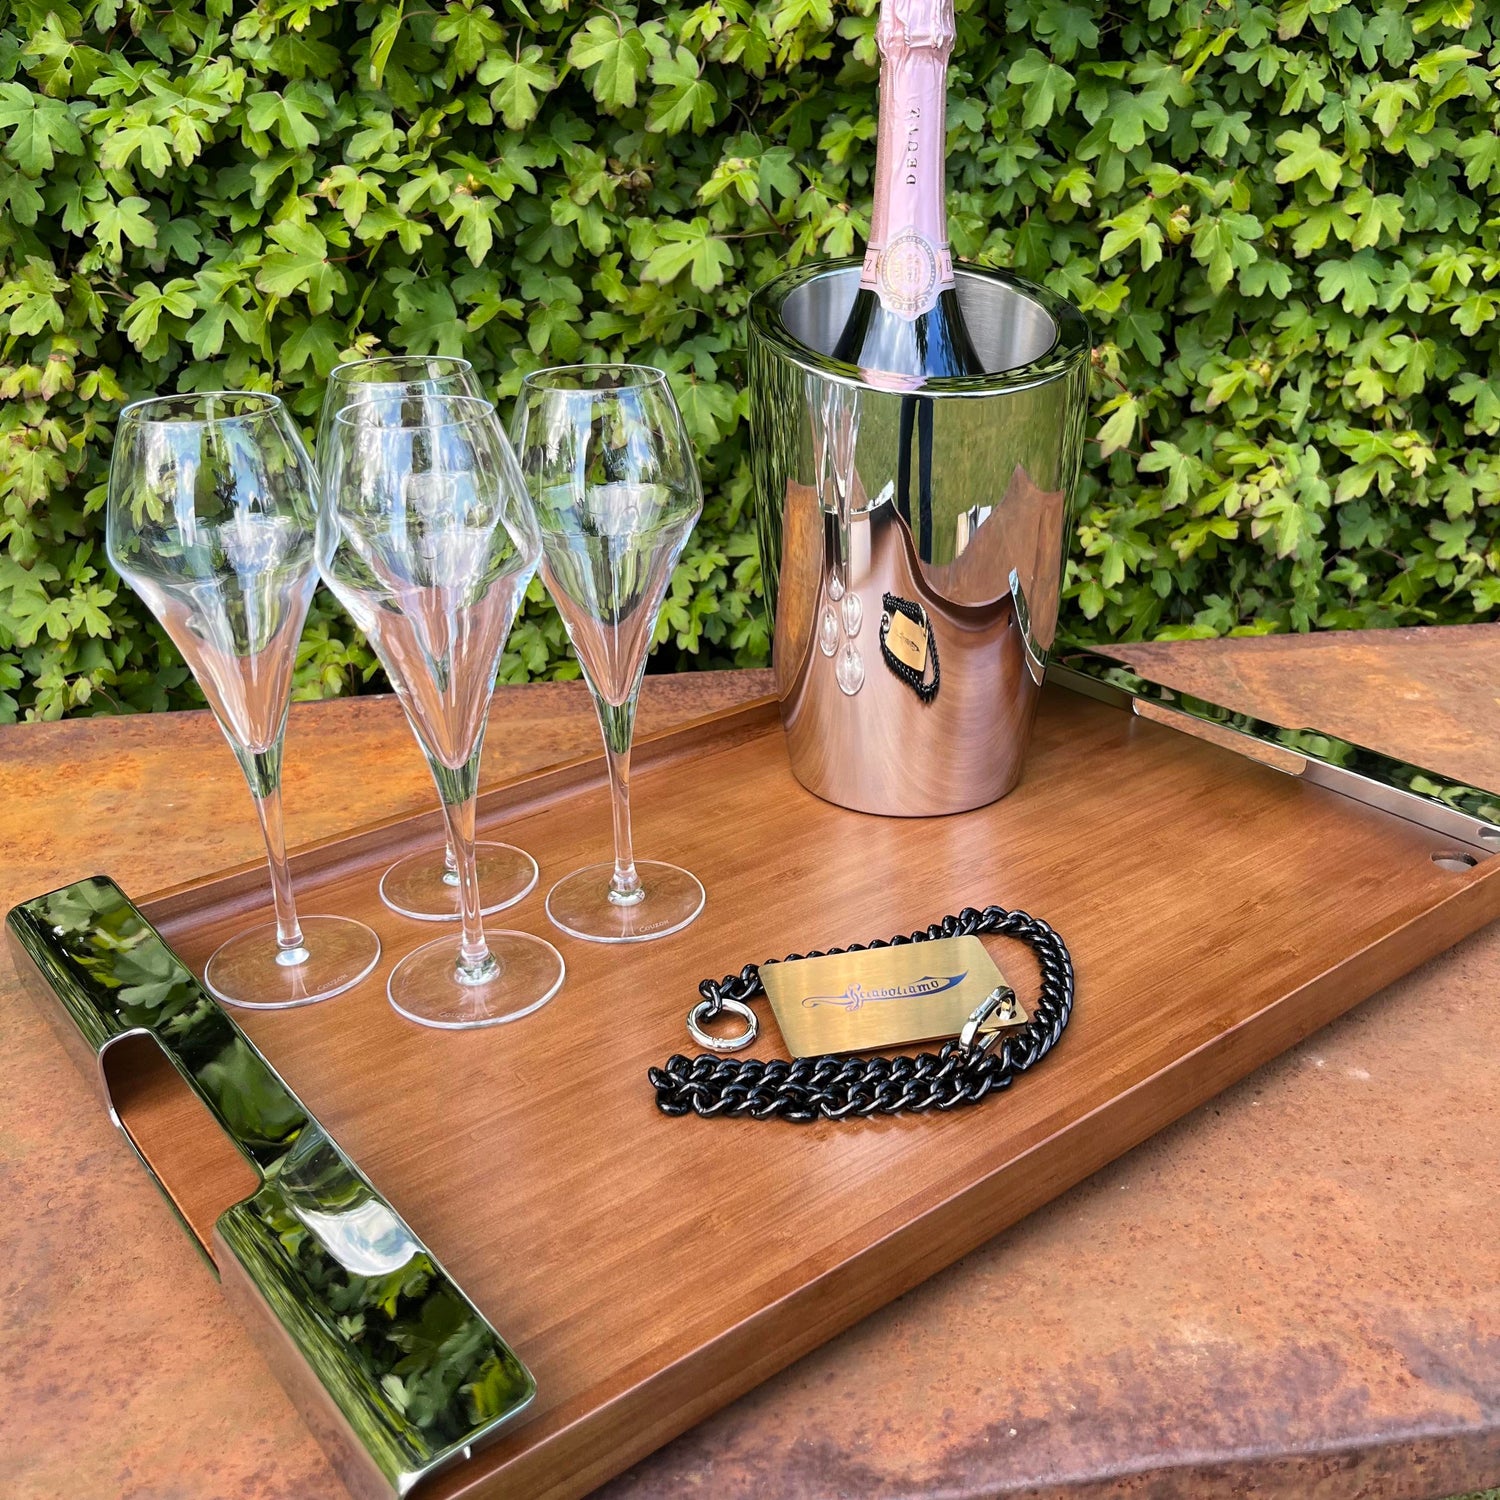 Deutz champagne with glasses and a sabrage card - champagne season